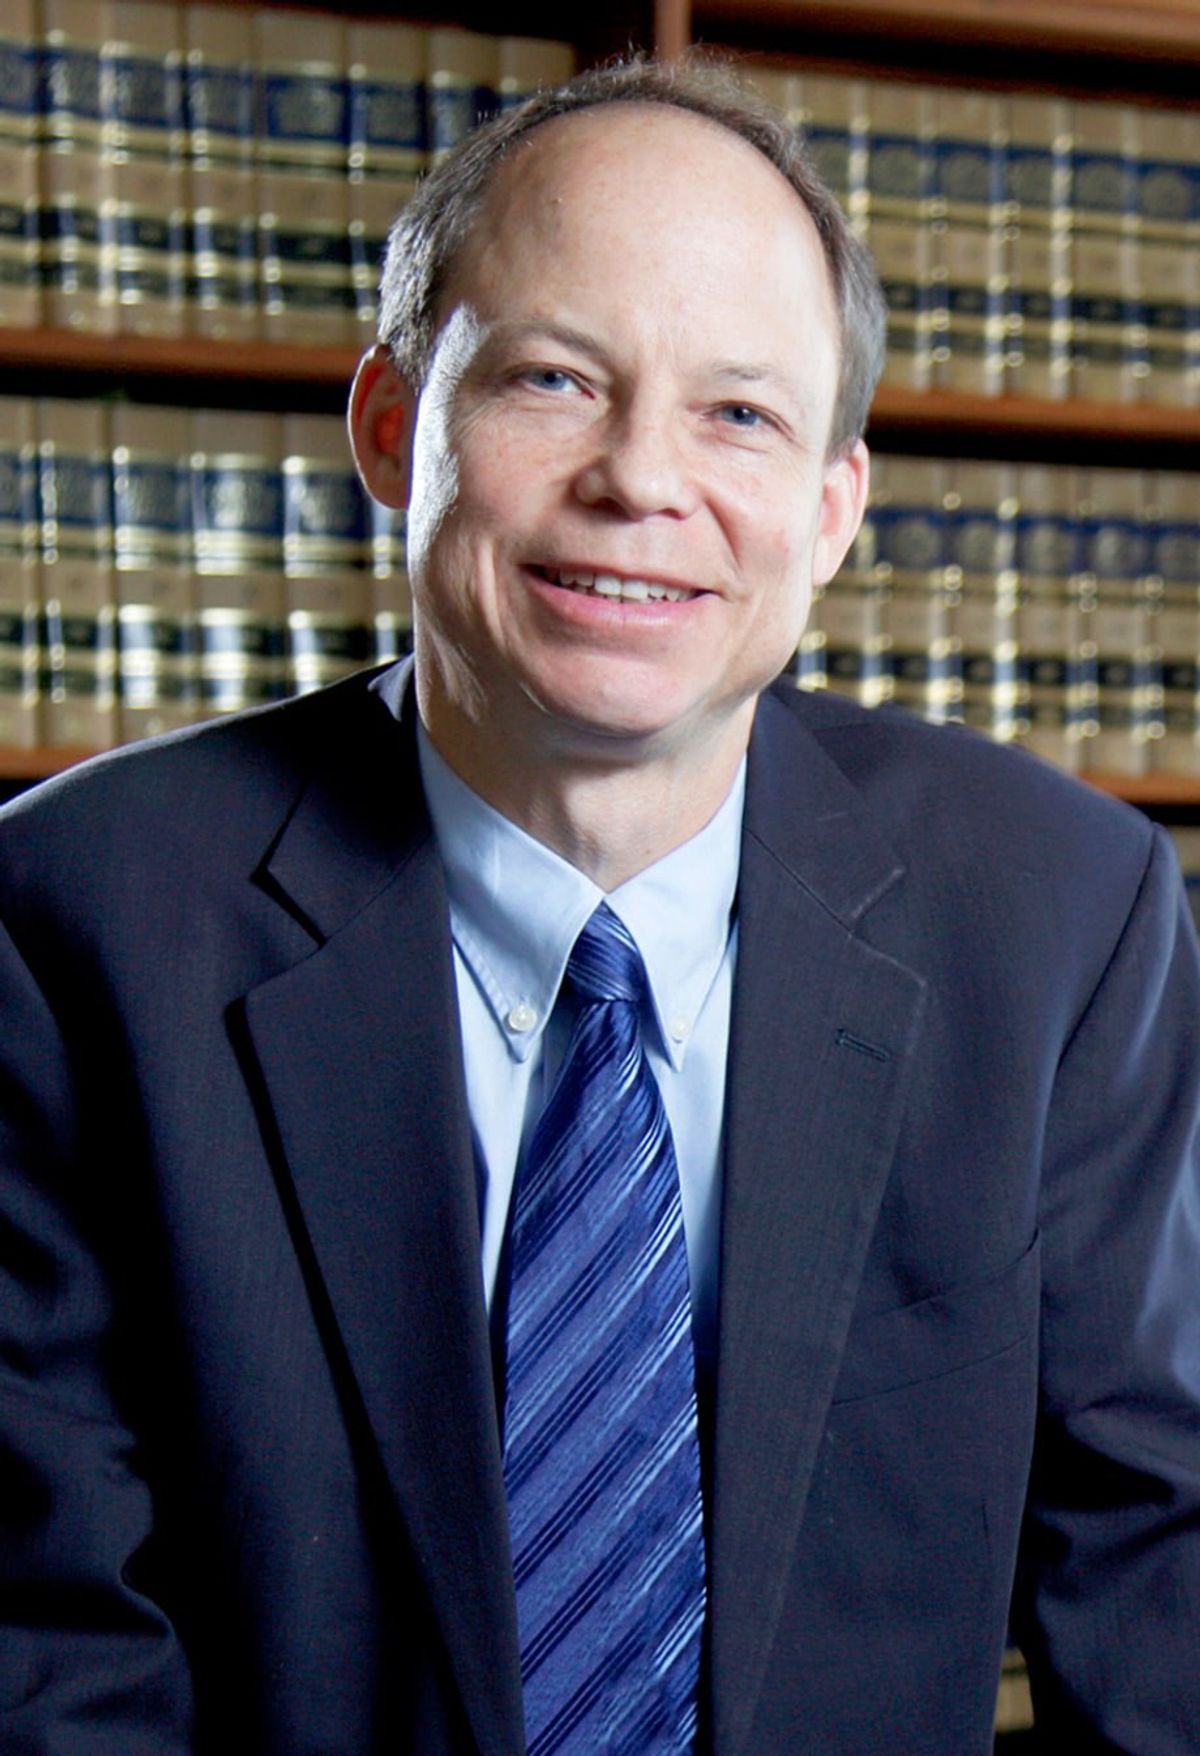 Stop Talking About Judge Aaron Persky